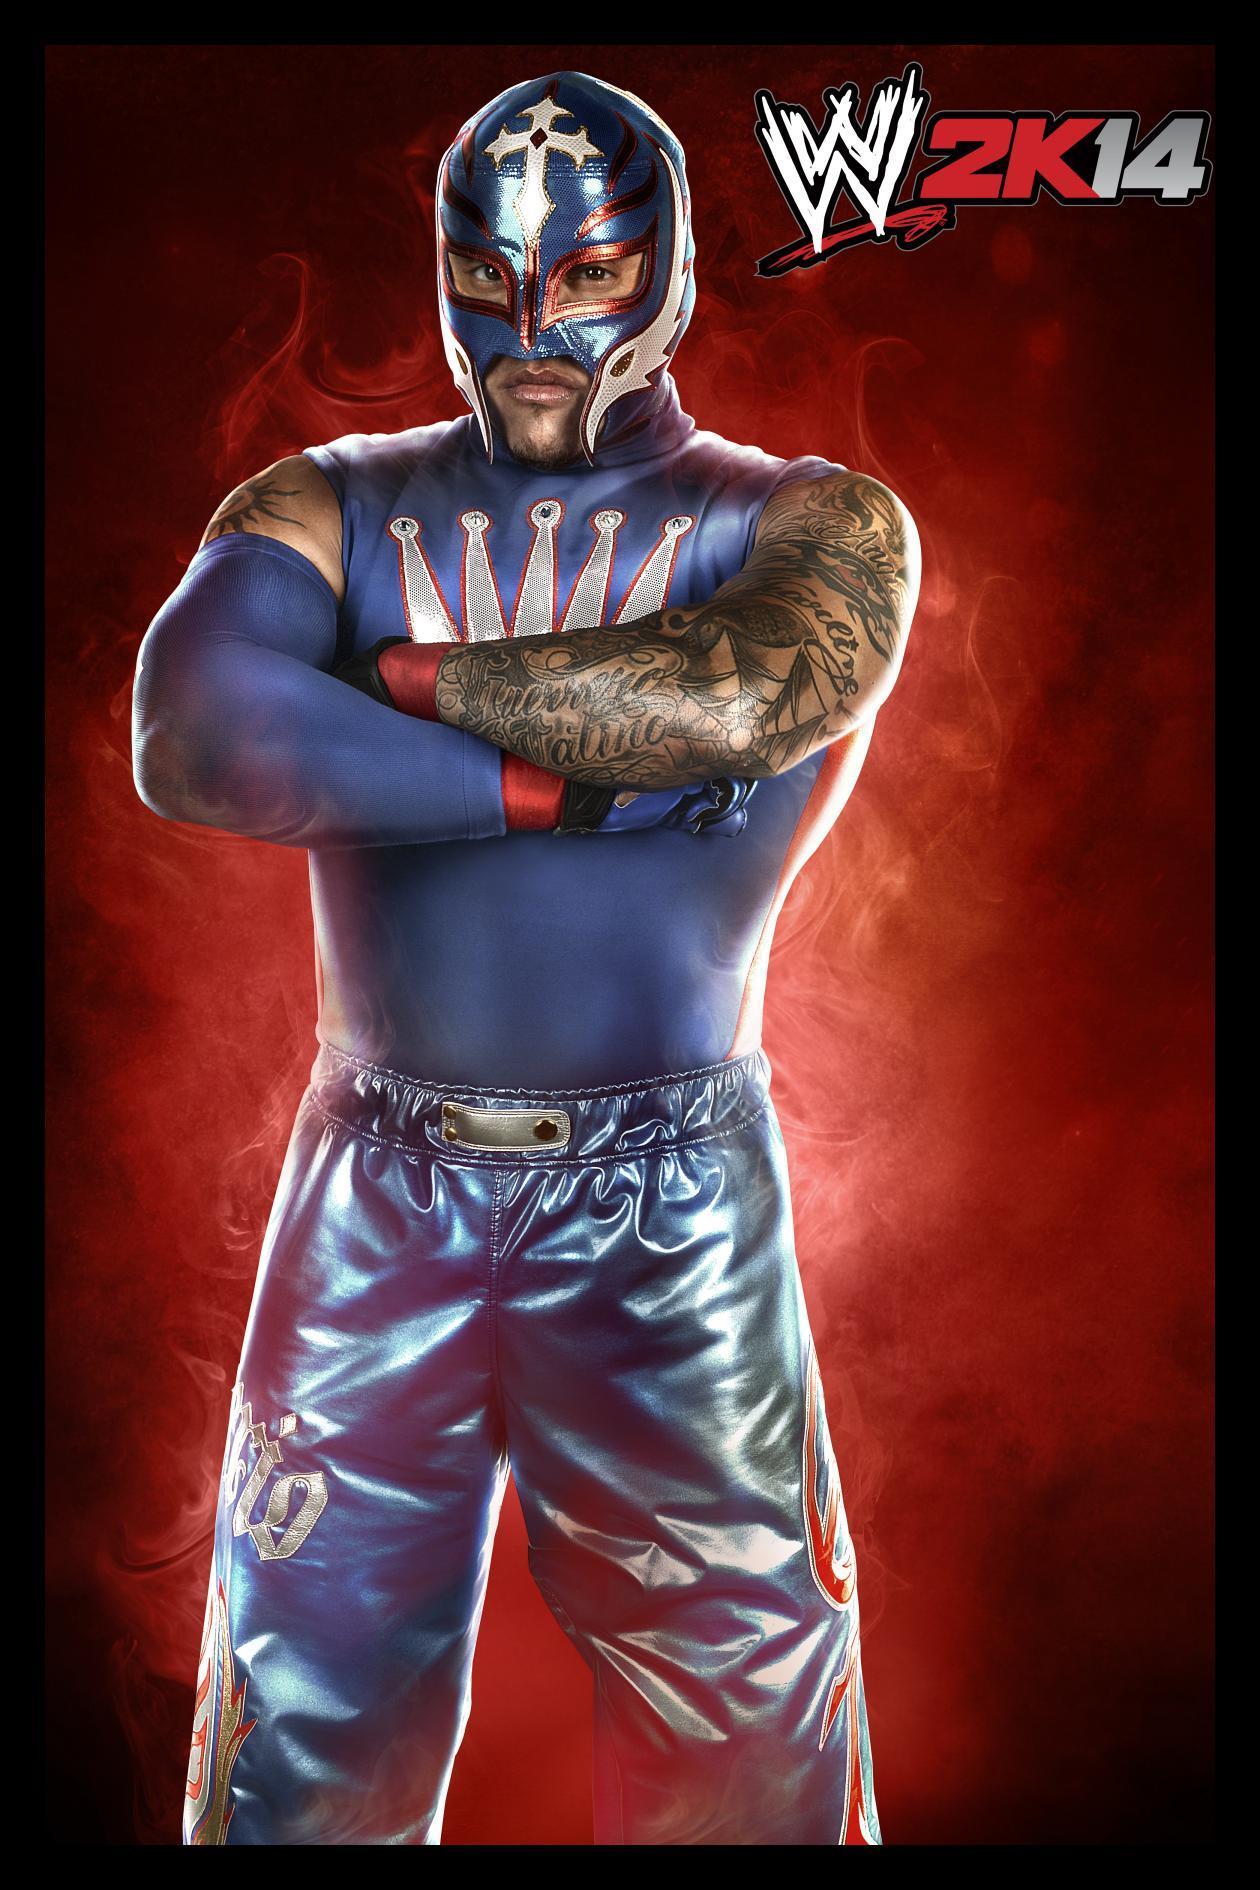 WWE 2K14&;s full character roster revealed, get the list & pics